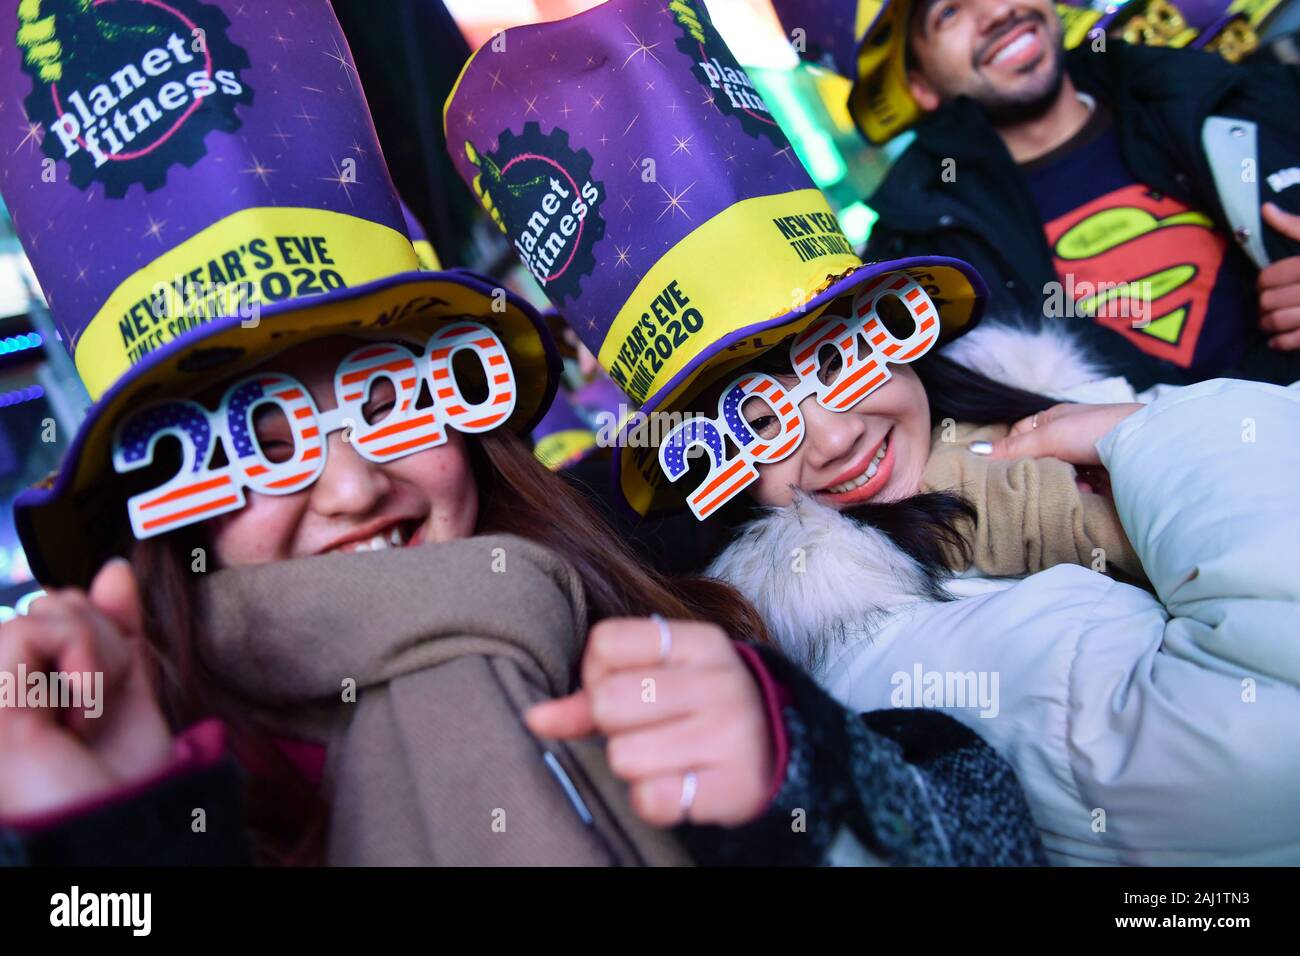 New Years Eve revelers are seen during the Times Square New Year's Eve 2020 Celebration on December 31, 2019 in New York City. Stock Photo